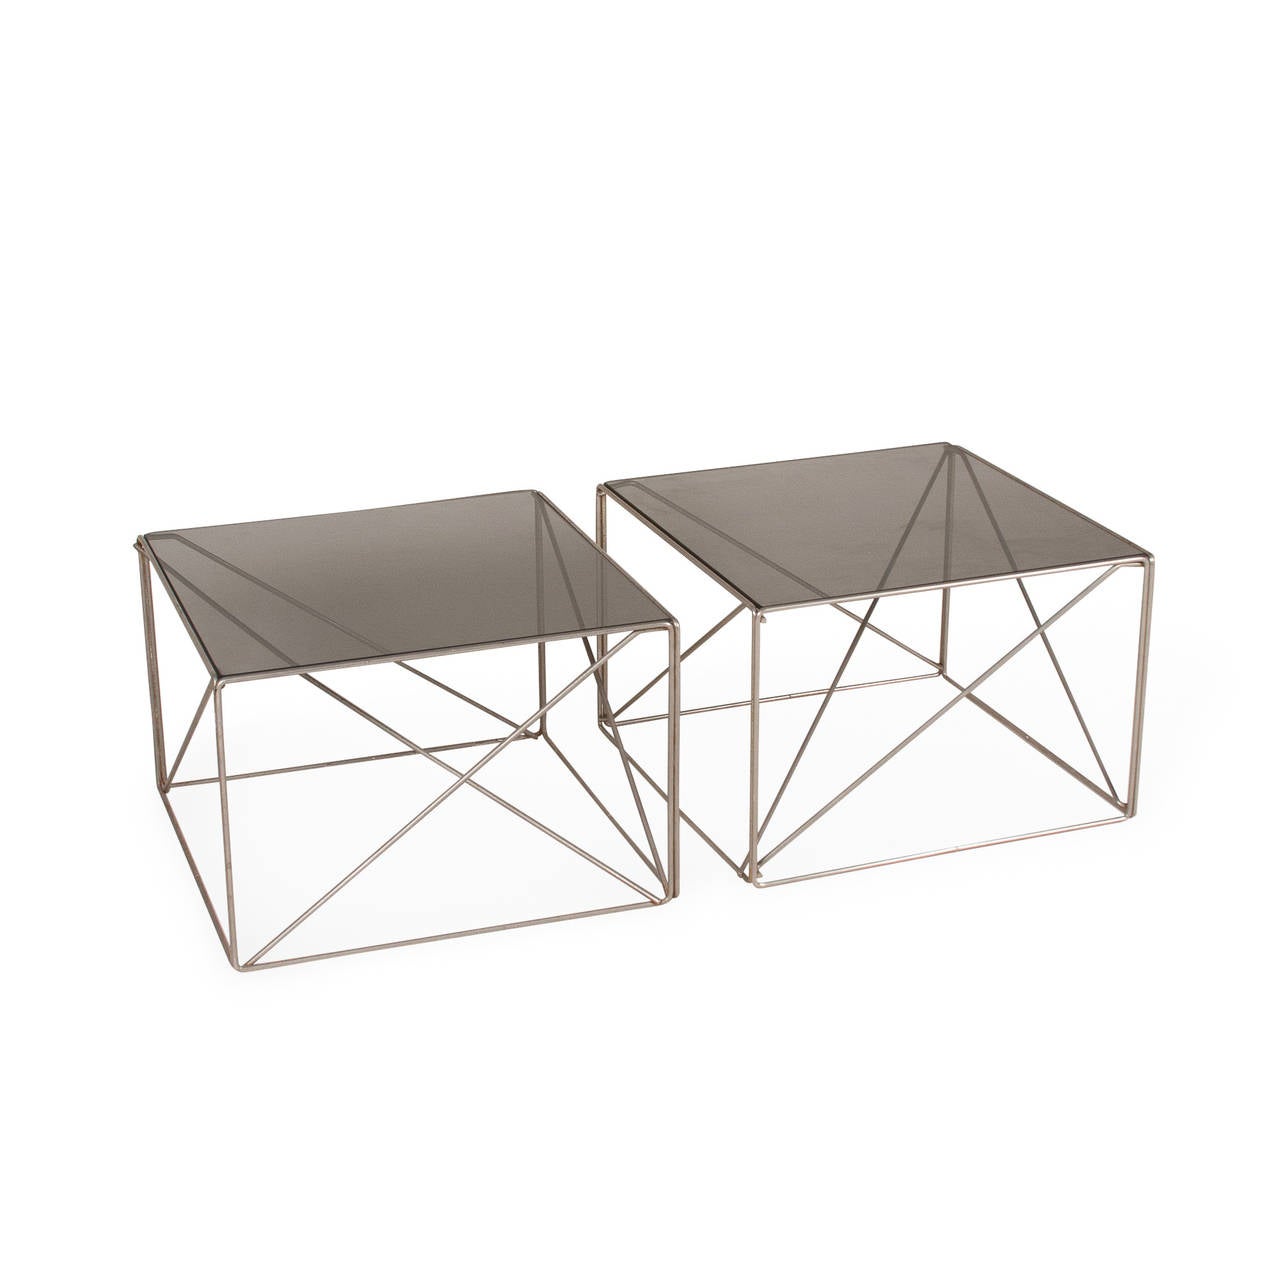 Pair of chrome rod frame end tables, the rods arranged in various intersecting triangles, with smoky grey glass top, by Max Sauze for Rouve, French, circa 1970. 17 1/2 in square, height 12 in. (Item #2267)